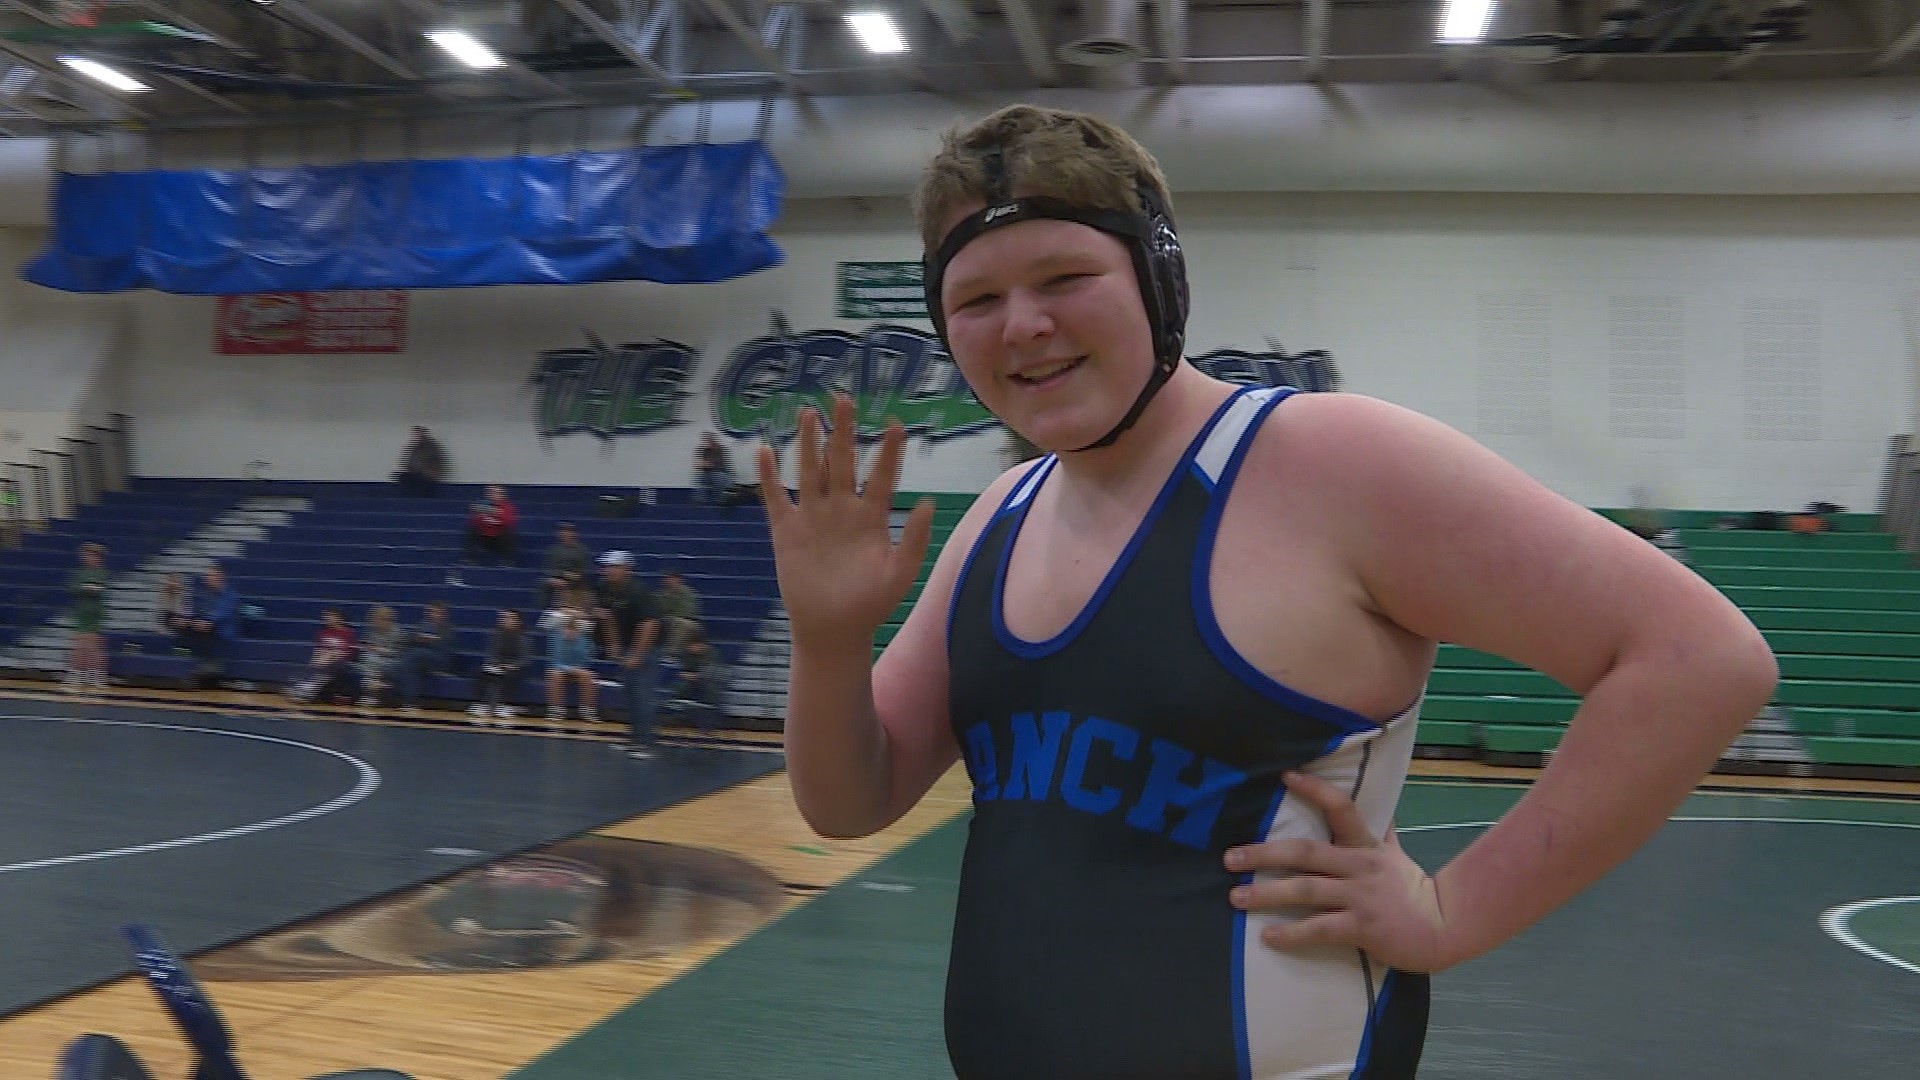 Connor McGehee, a sophomore at Highlands Ranch High School, has found a sense of belonging with the wrestling team.